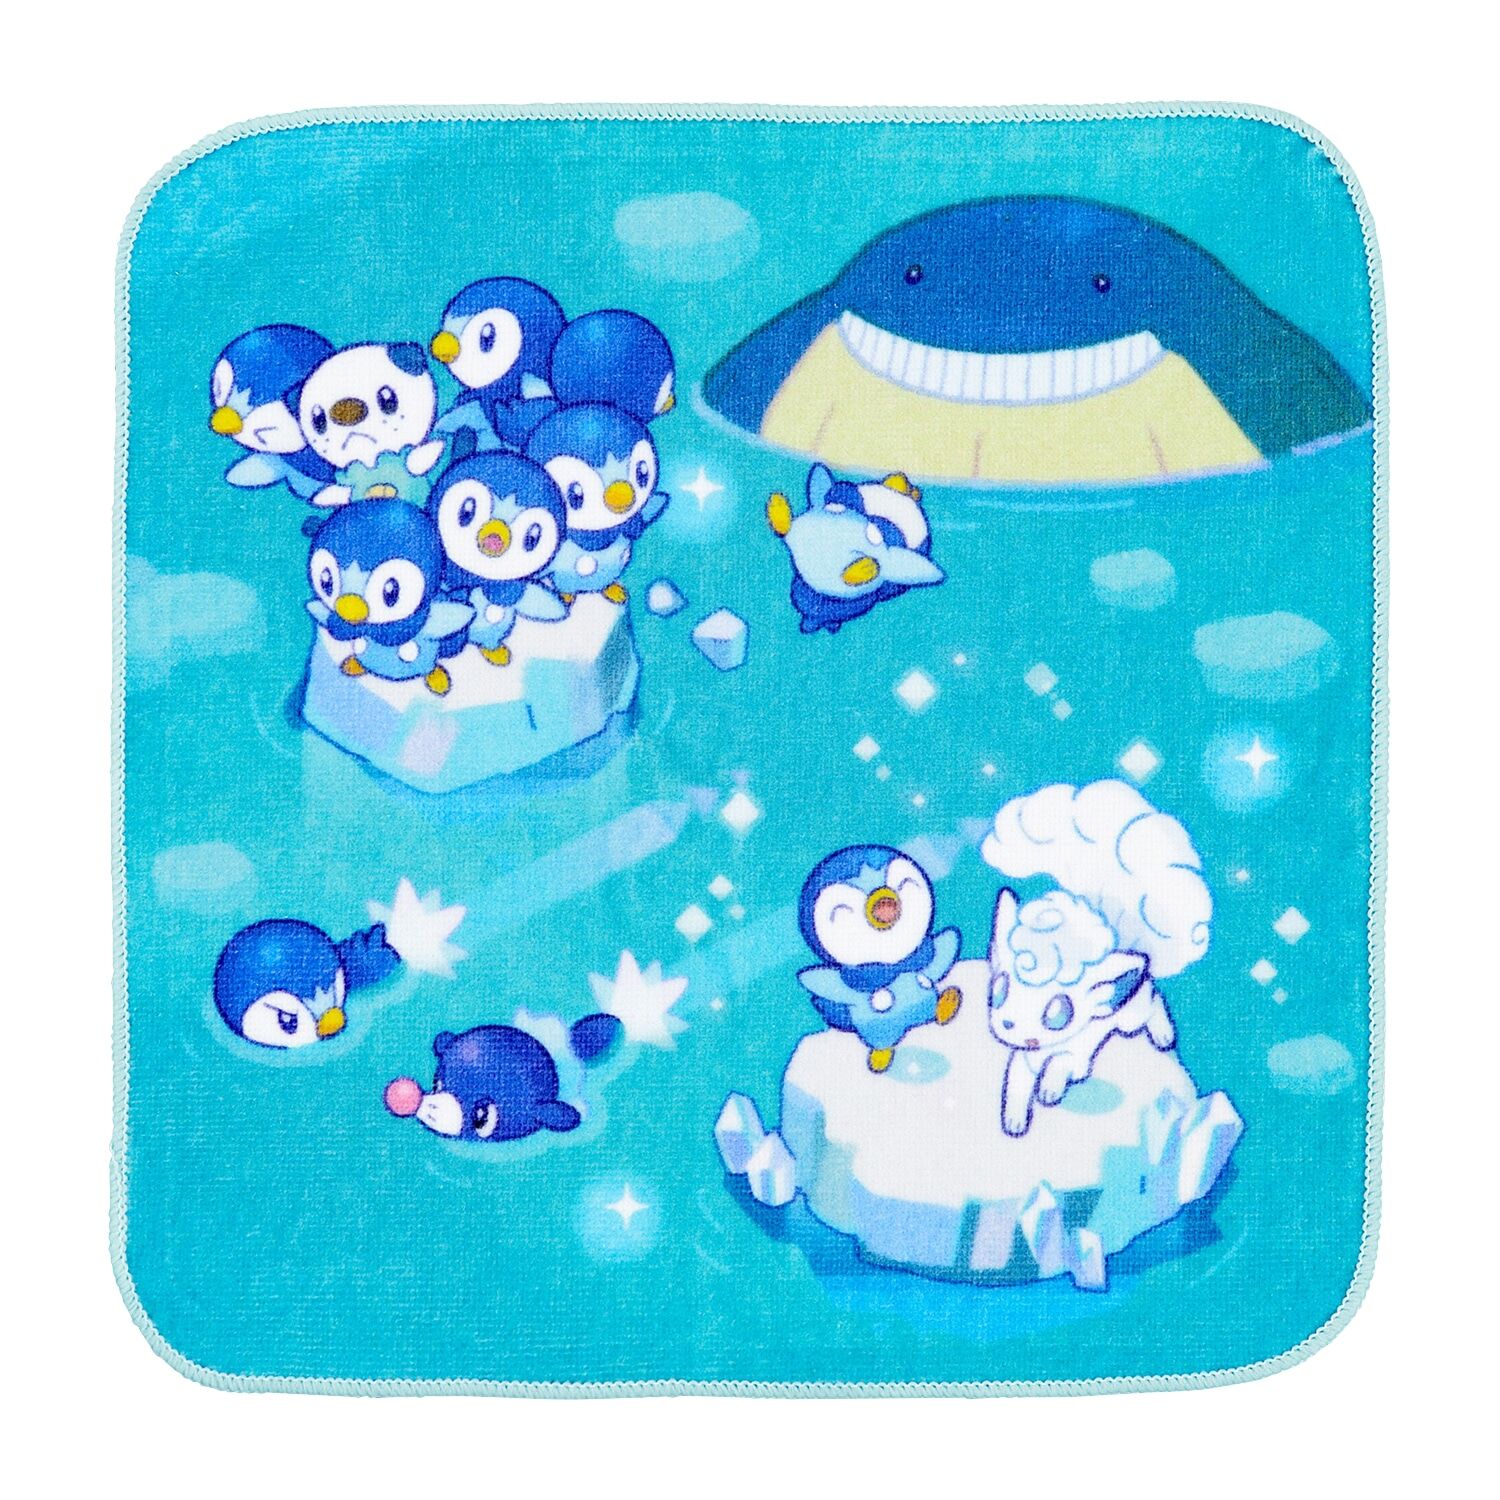 Piplup Hand Towel - 25 x 25 cm